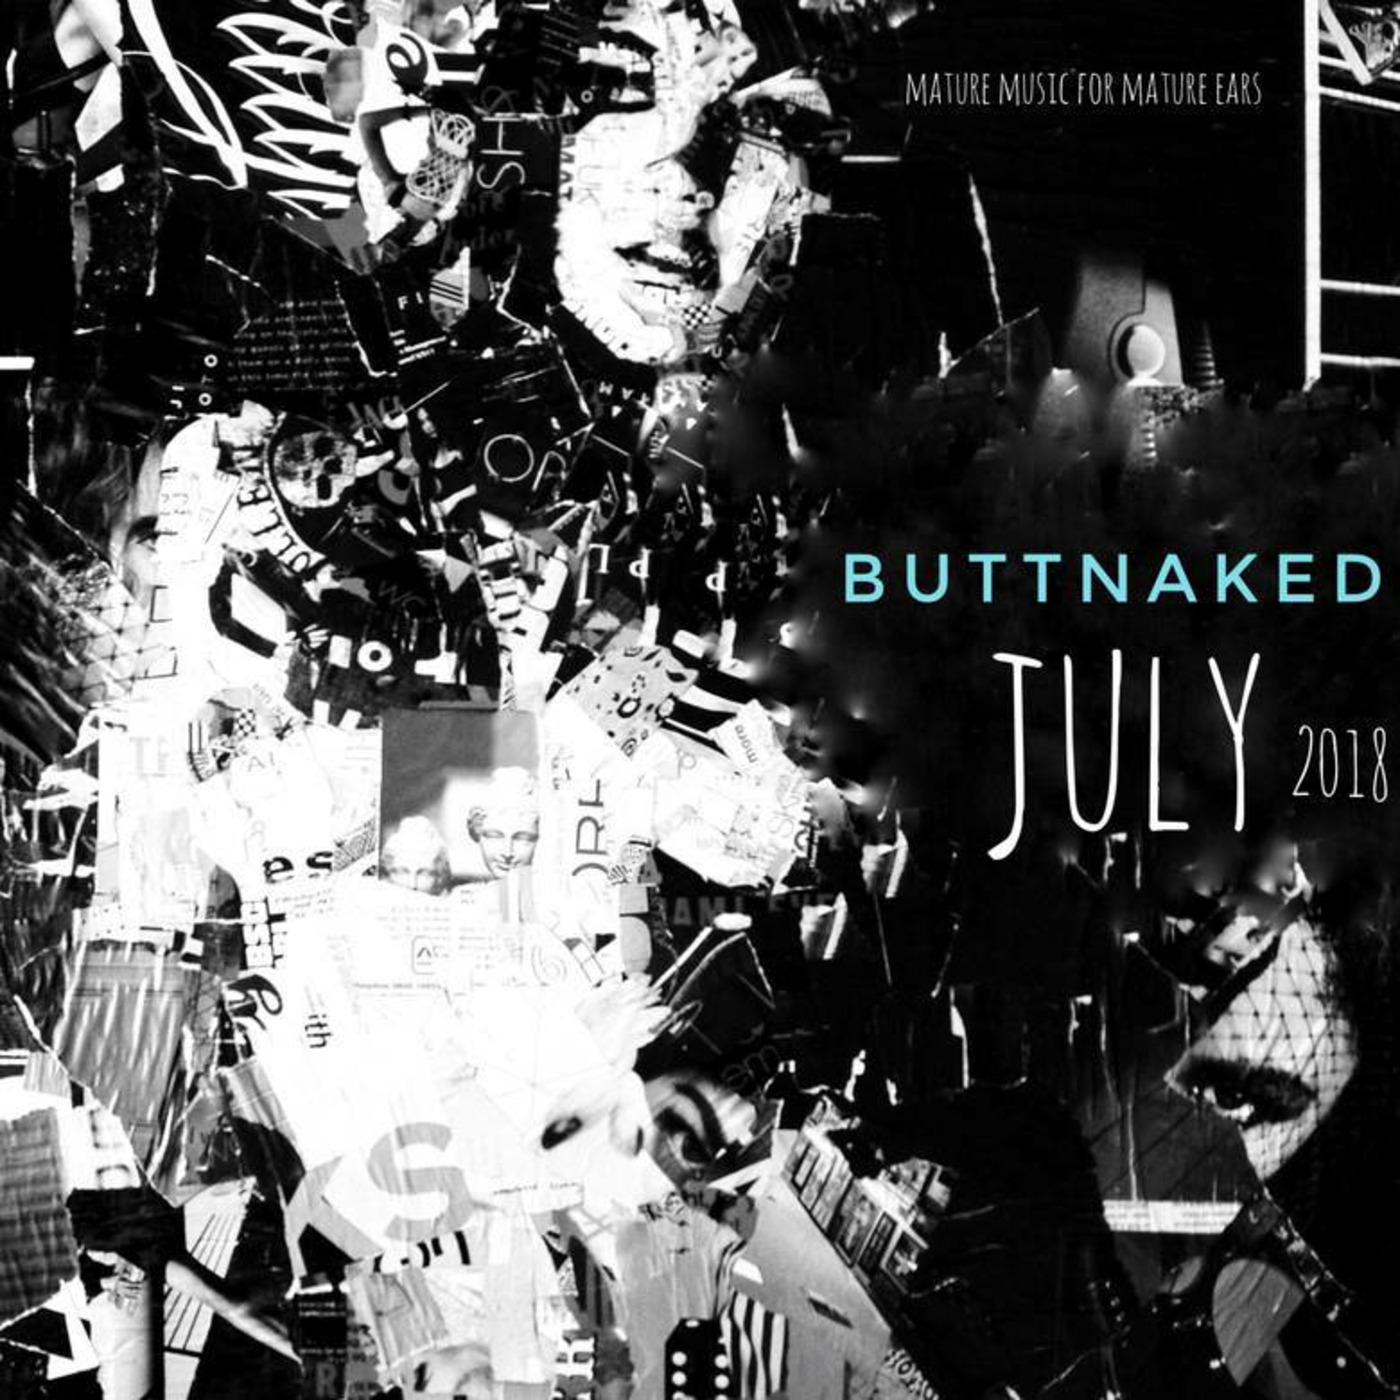 July 2018 - Iain Willis pres The Buttnaked Soulful House Sessions